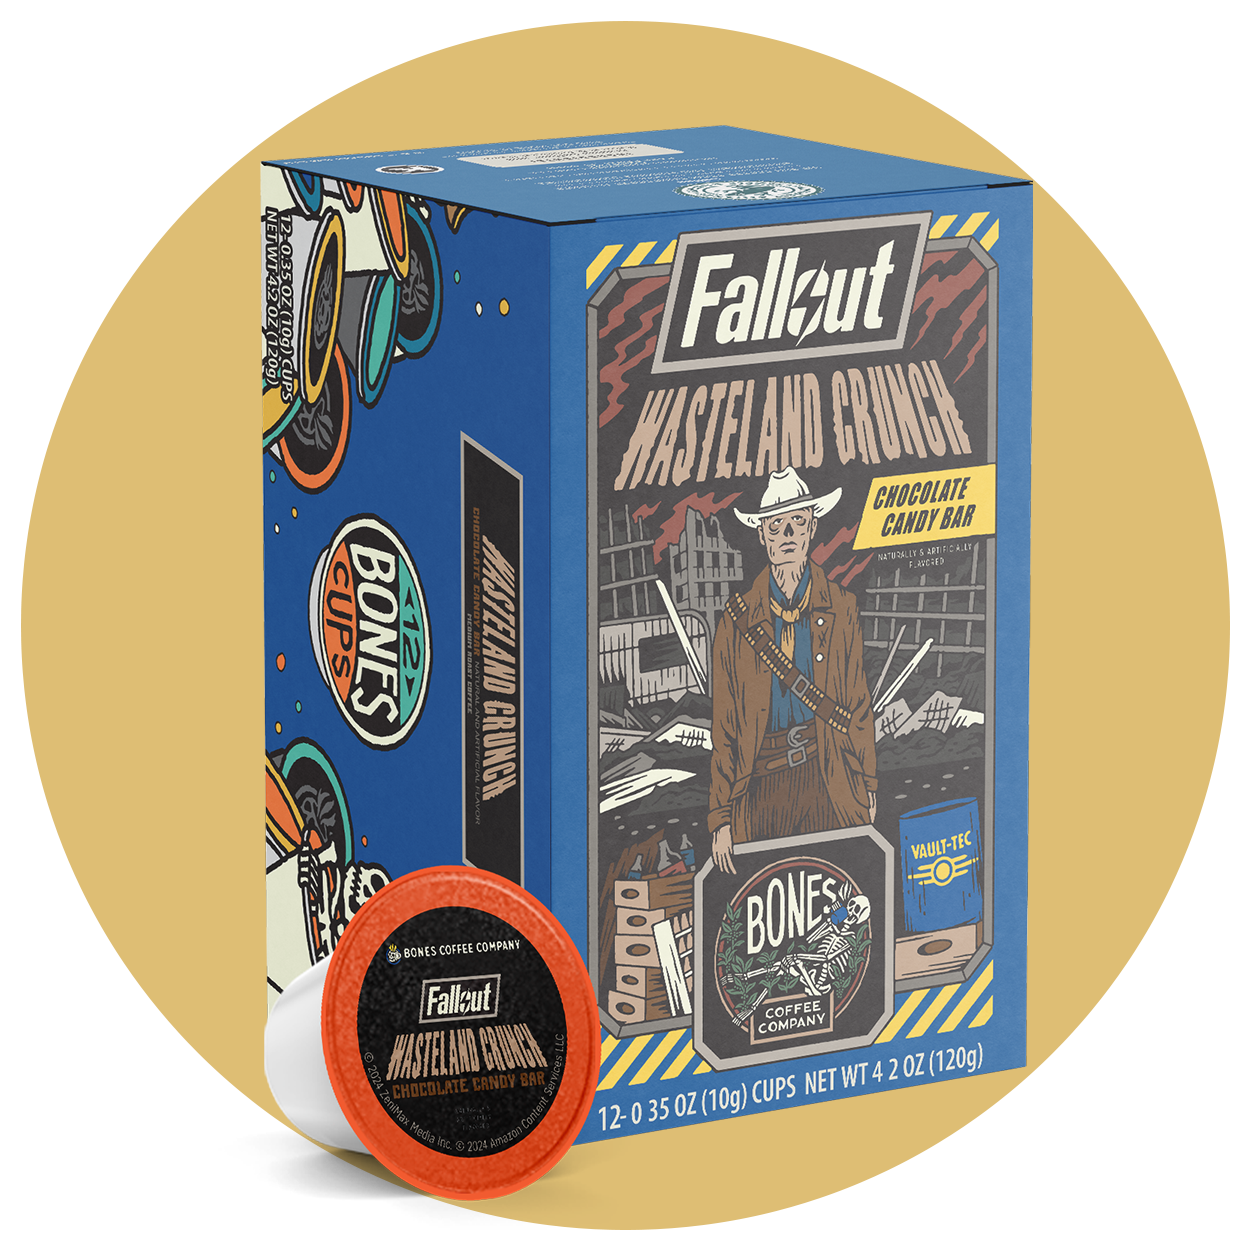 A box of Bones Cups flavored coffee inspired by Fallout named Wasteland Crunch. Its flavor is chocolate candy bar. On the art is The Ghoul from the Fallout show, and there is a stylized head of The Ghoul near it alongside a chocolate candy bar. A light brown circle is behind it.